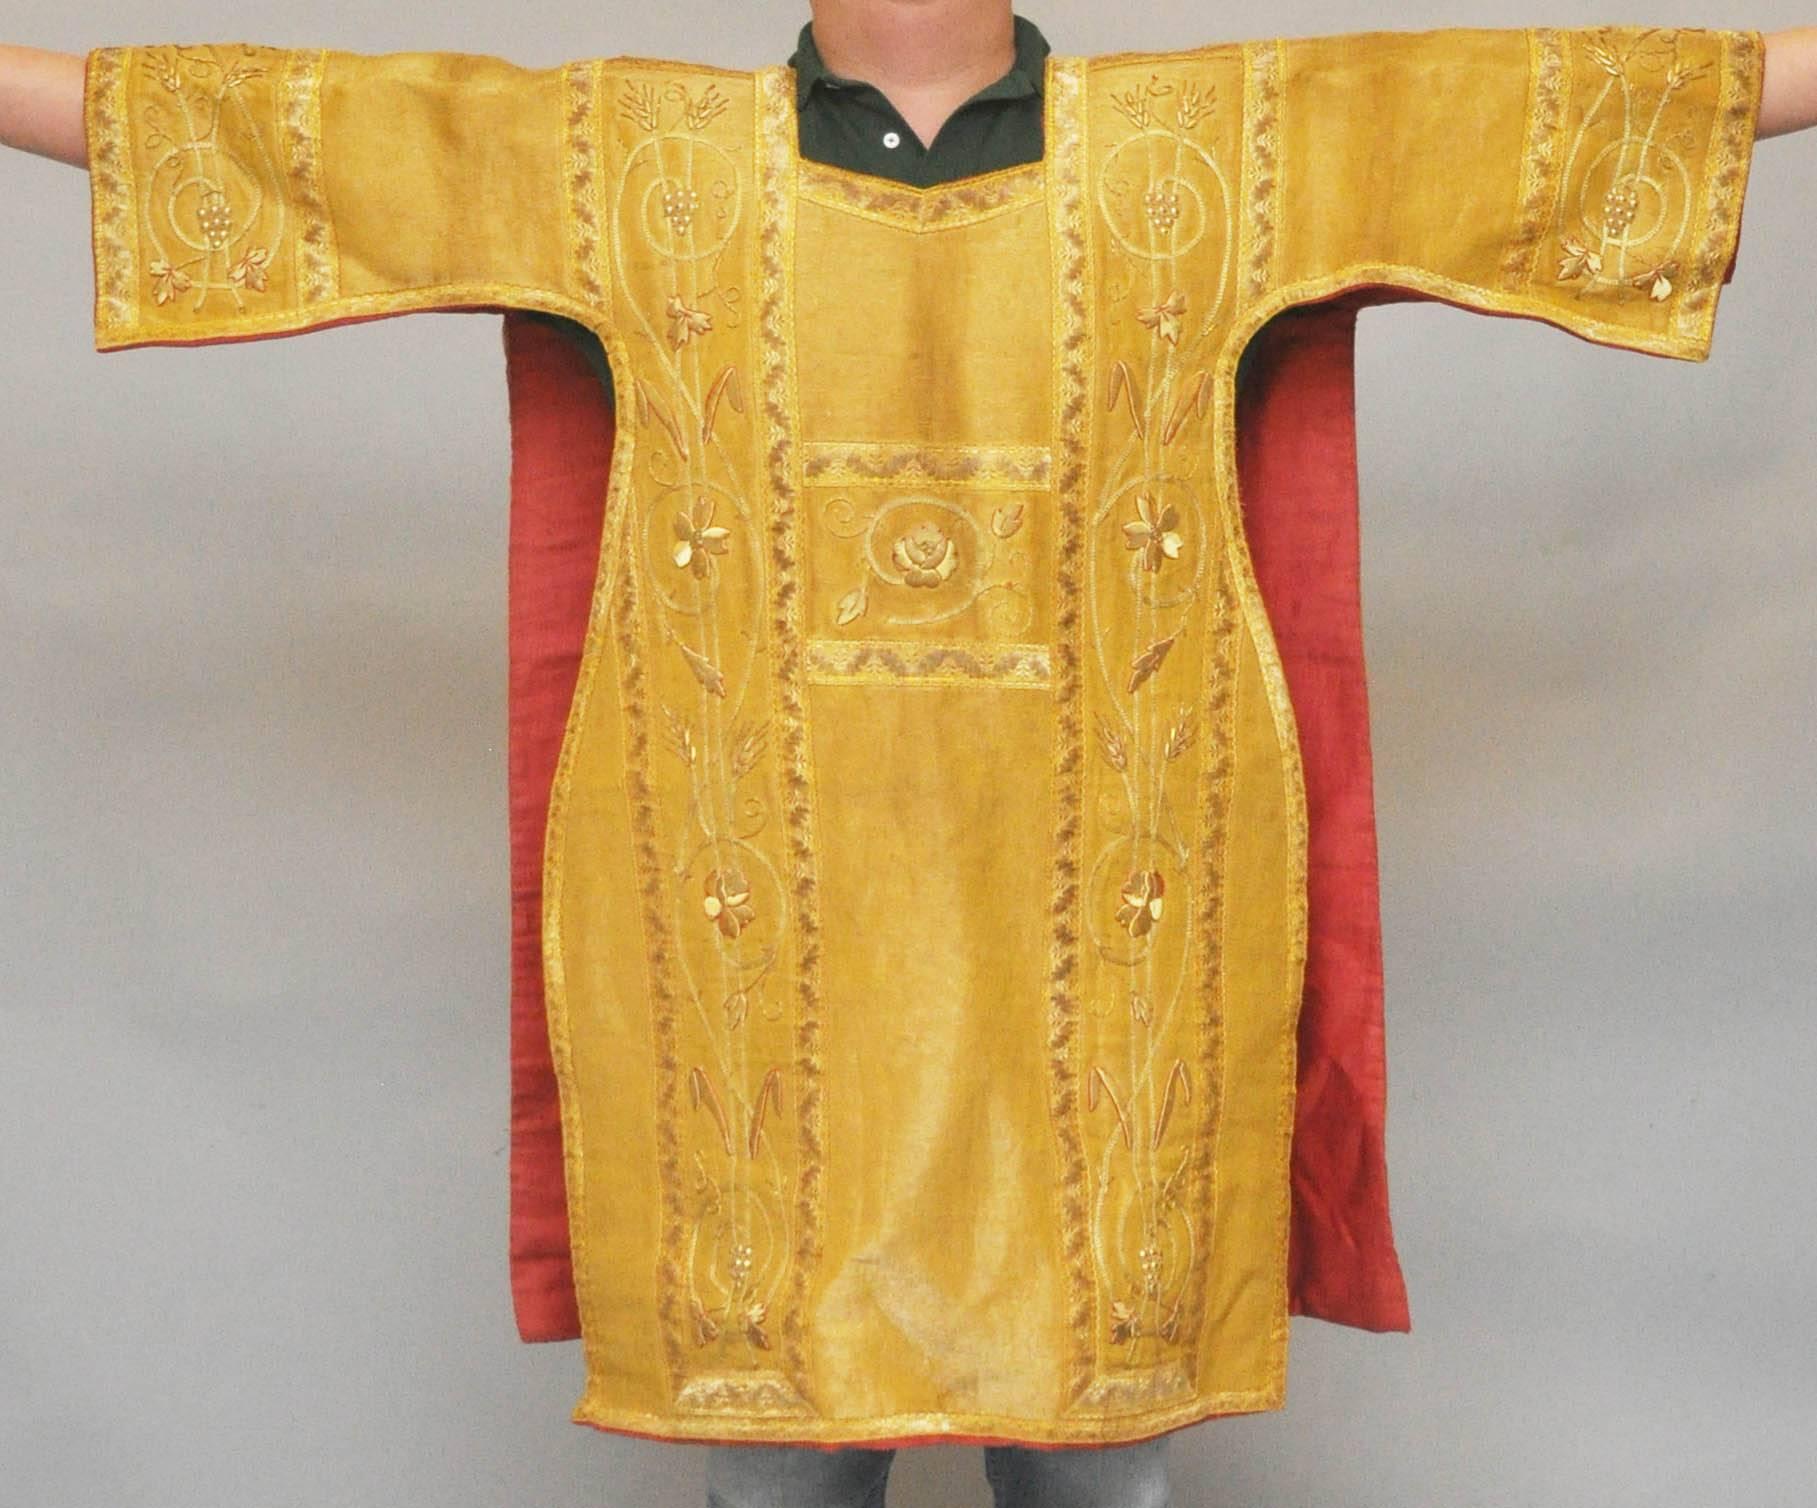 19th century gold silk vestment, religious garment which would of been blessed by the church. Trailing ecclesiastical silk and gold thread embroidery with Australian wild flower motif and Christian symbols wheat (loaves) and grapes (wine). The